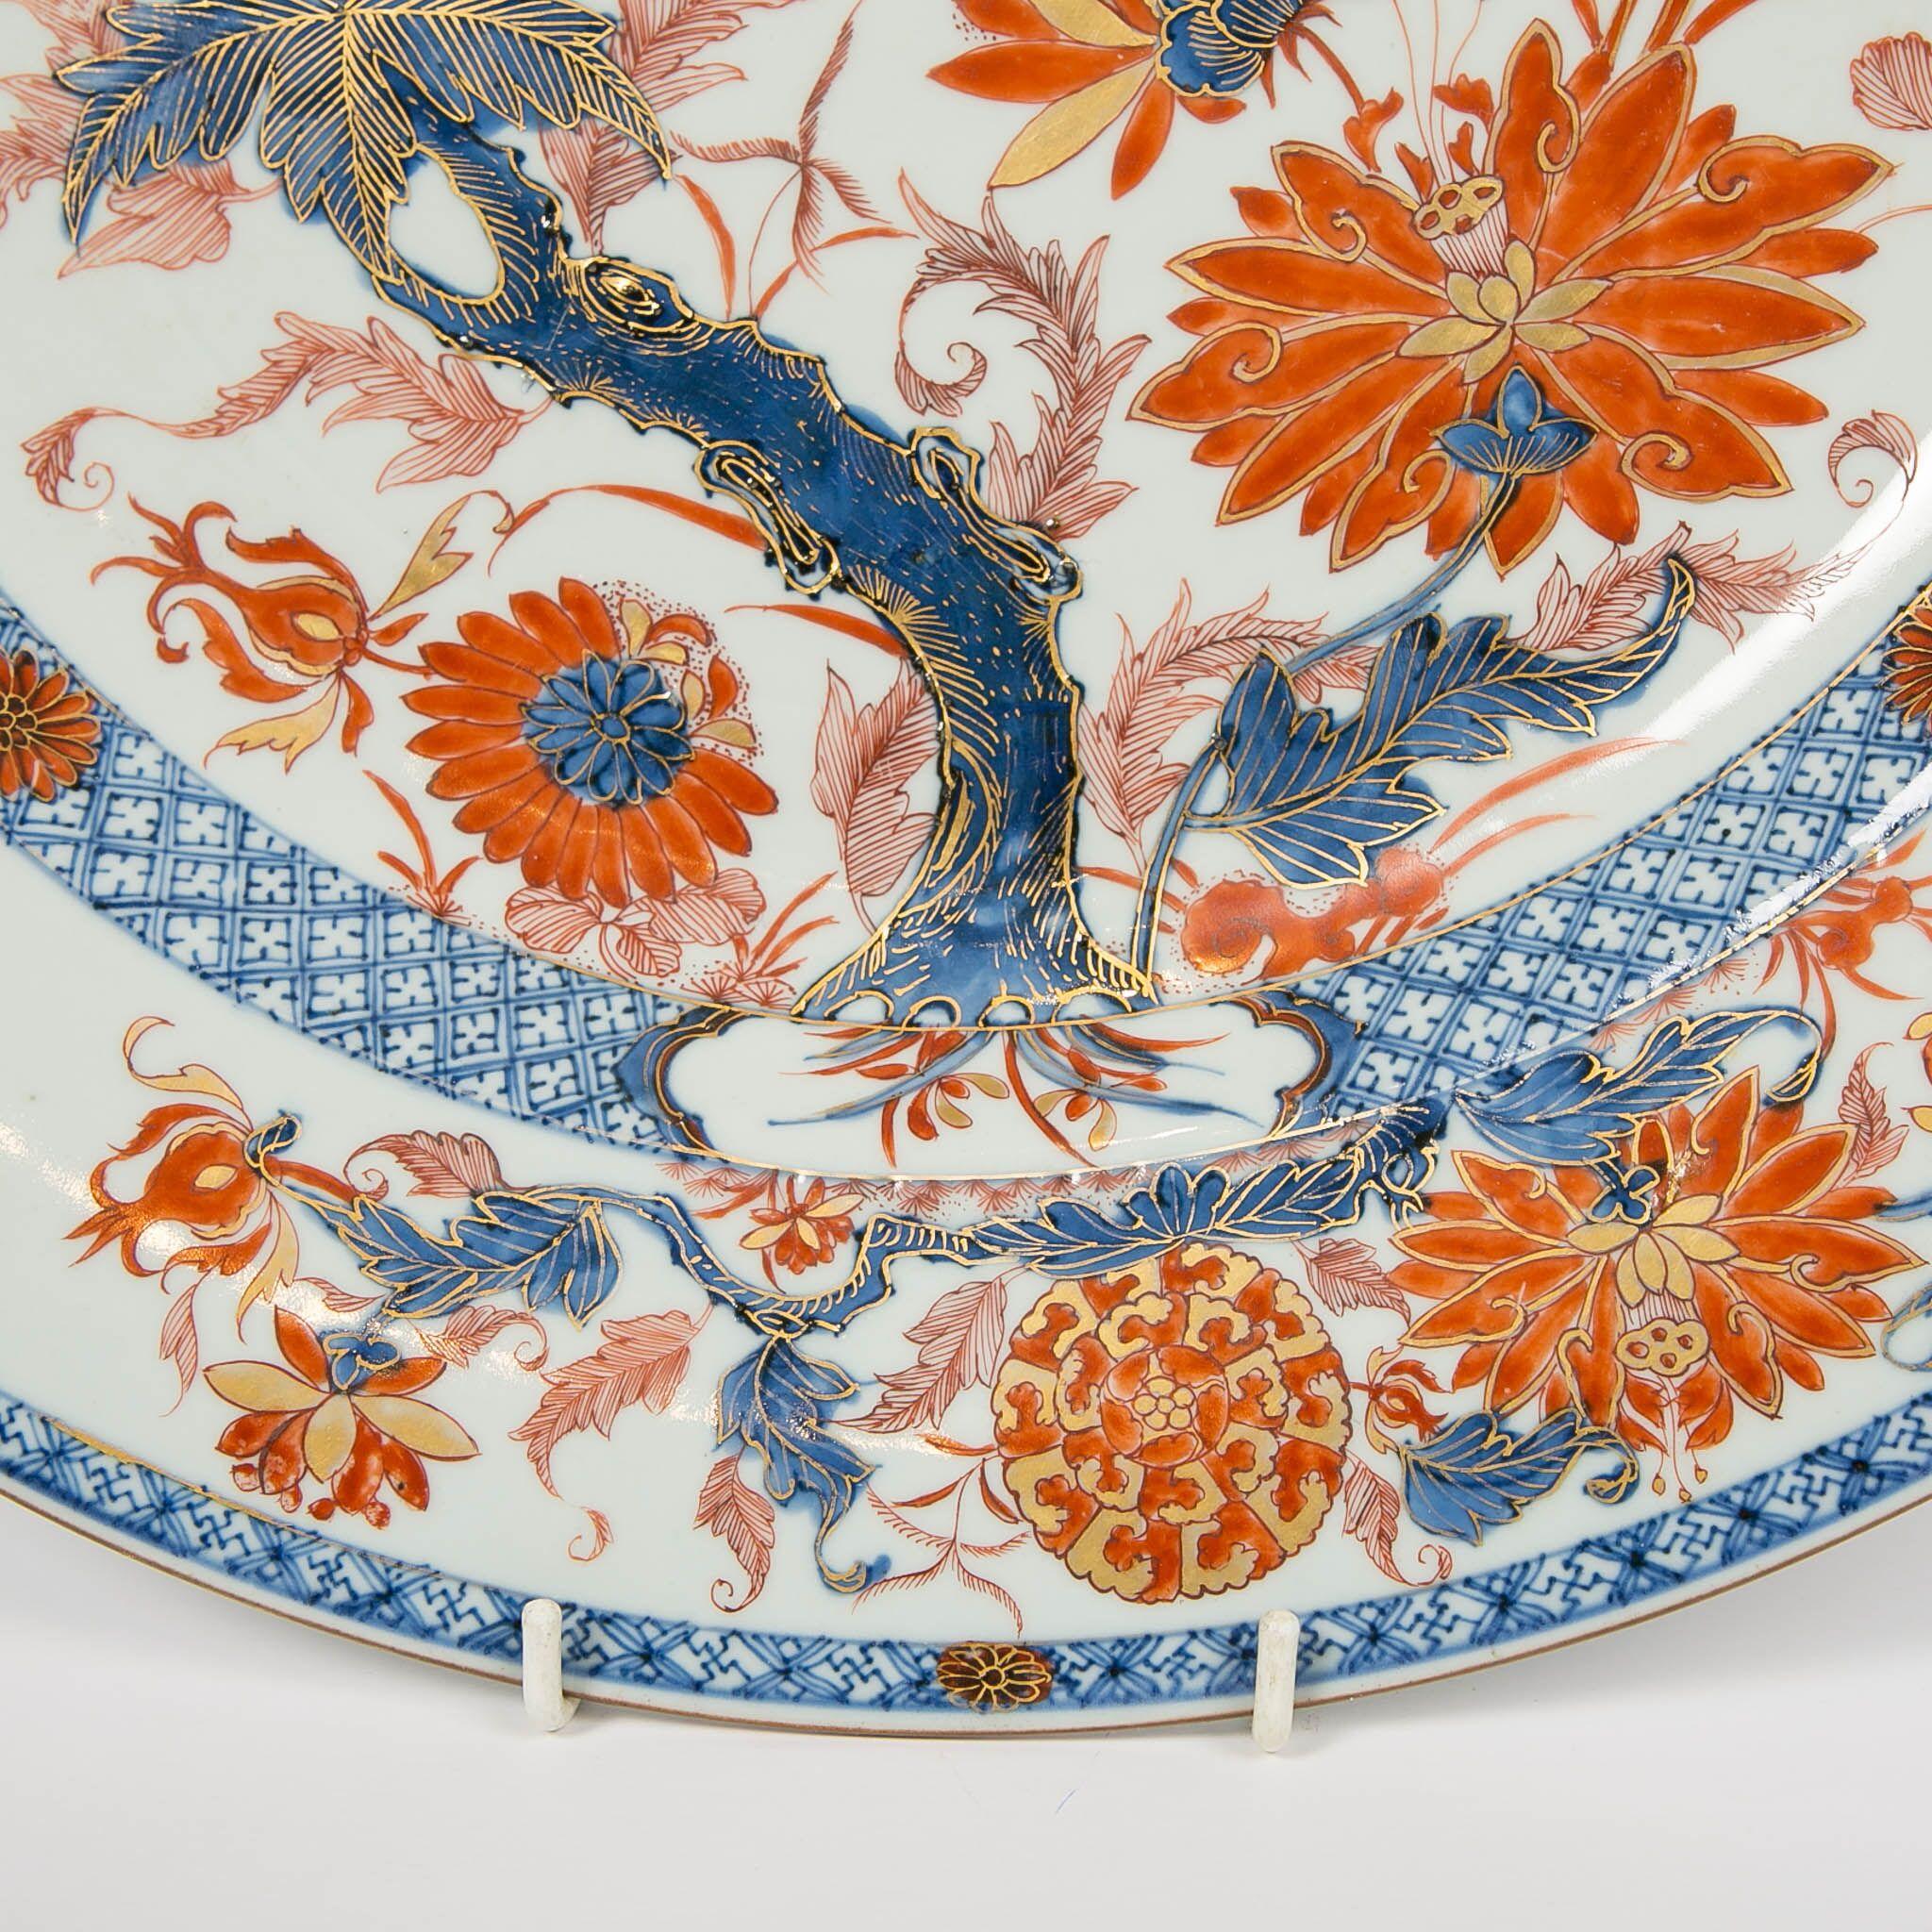 Qing Antique Chinese Imari Charger with Floral Decoration